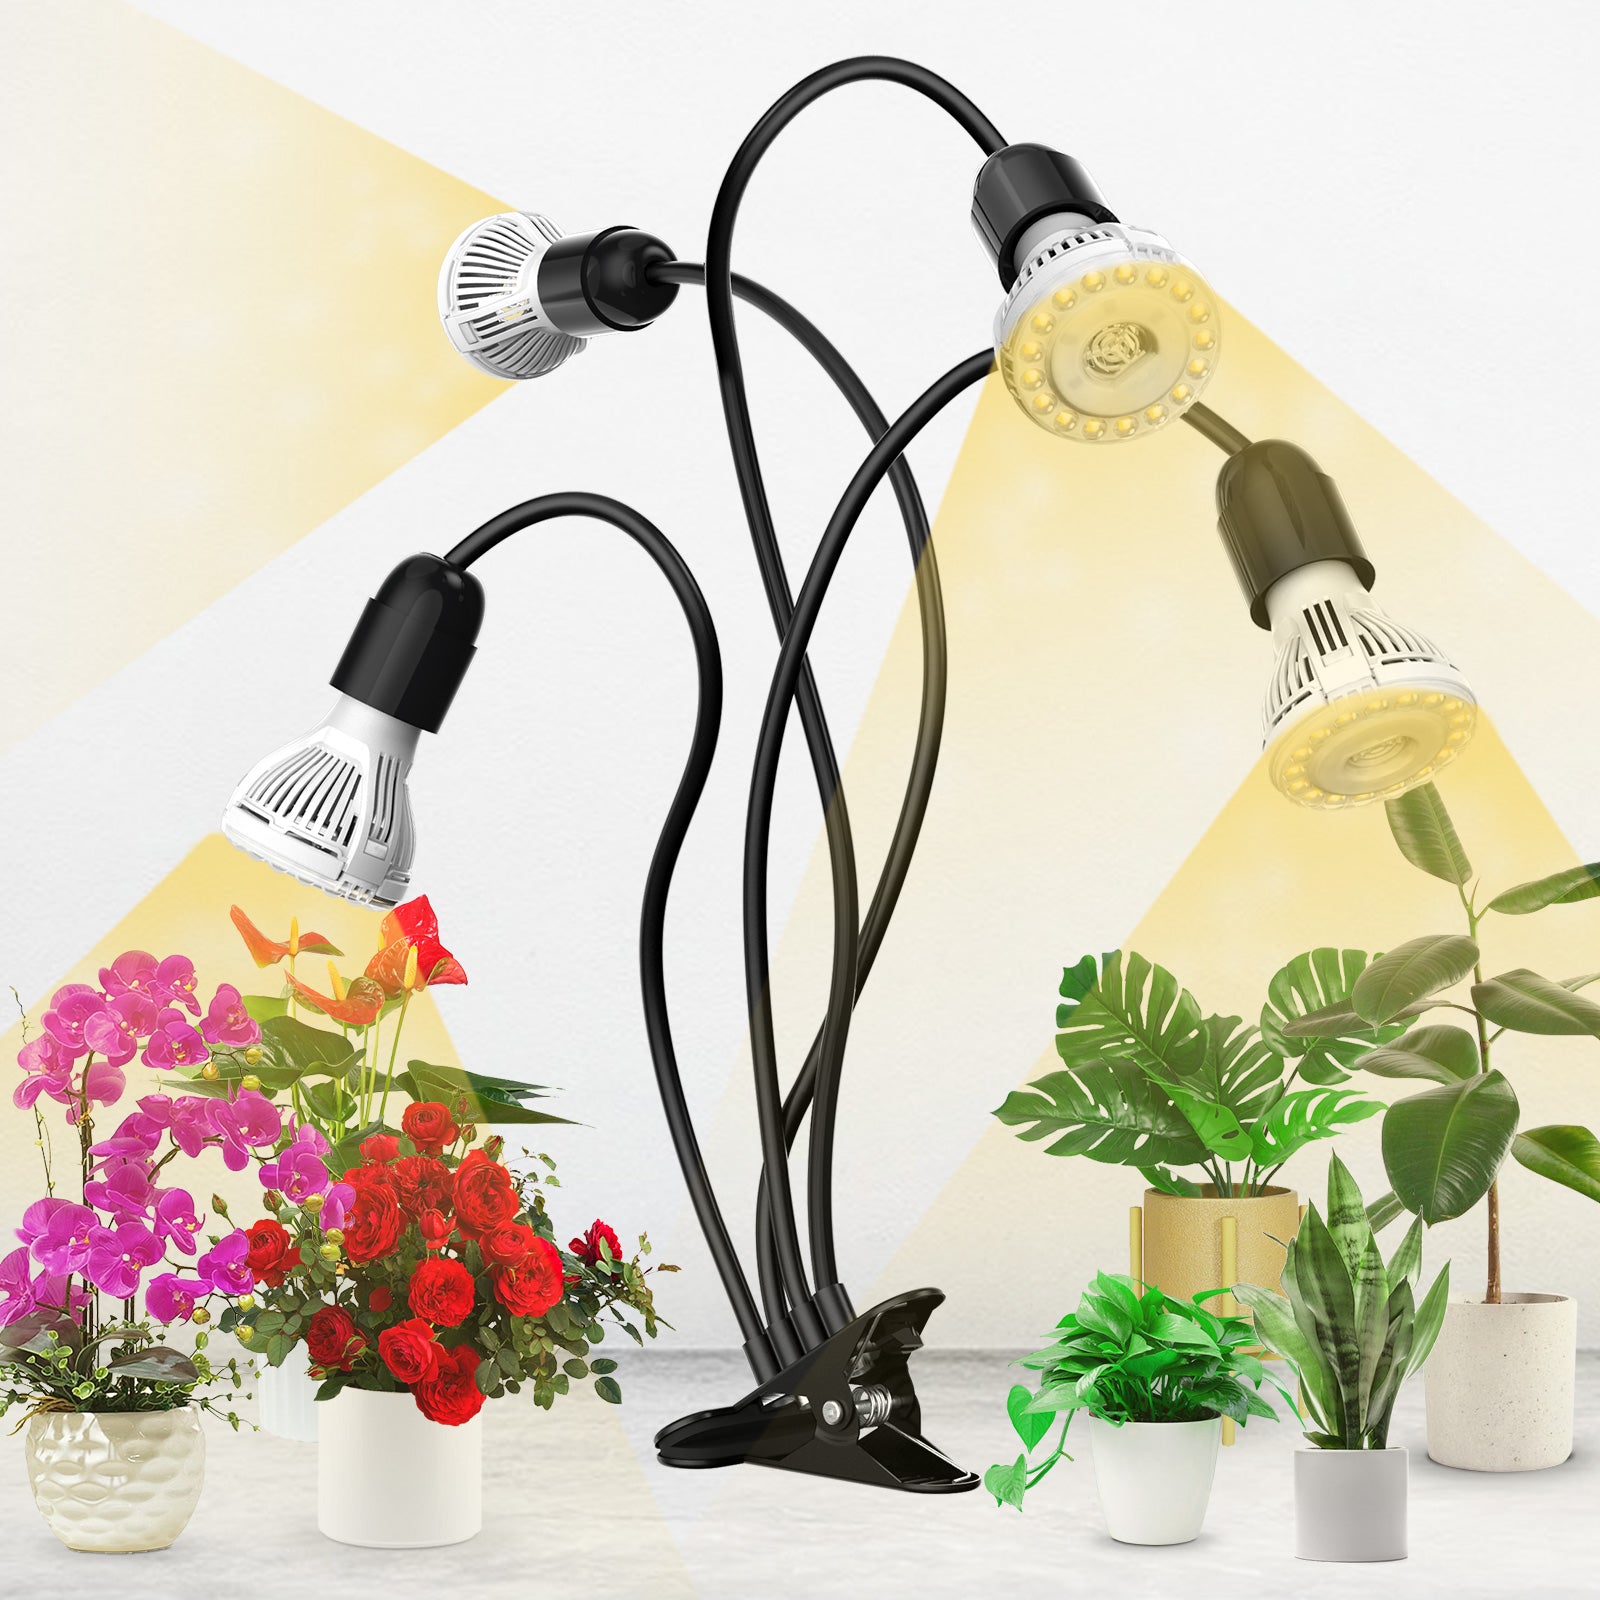 40W Adjustable 4-Head Clip-on LED Grow Light with Timer/No Timer